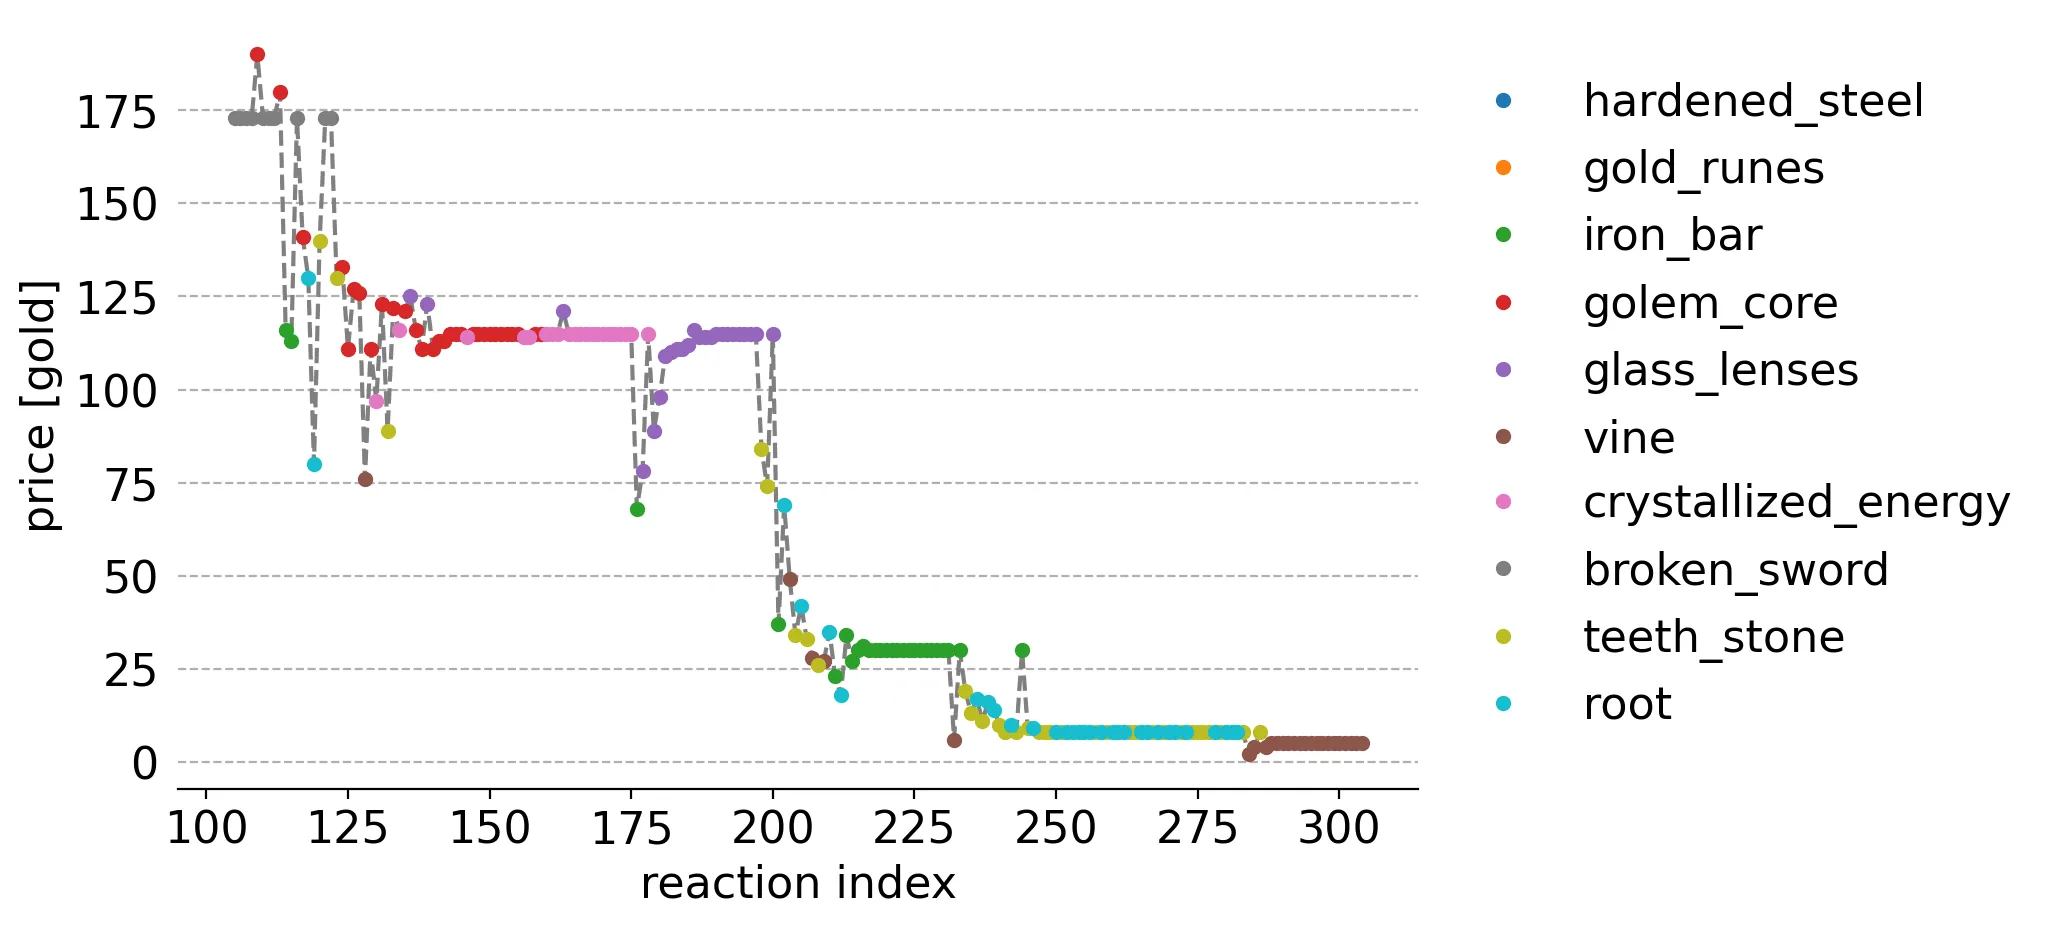 
    Price (y-value) and item (color) for each reaction (index is x-value) in order of all customer
    reactions for the remaining reactions (105 and above).
    Shows broken sword leveled off to its ideal price and eventually disappears (all sold).
    Reactions to random items at lower prices occur until the algorithm seems to settle on the golem
    core item, at its ideal price, until reactions for it stop becuase it has been sold off.
    The same things happens to crystiallized energy and then glass lenses.
    The same random process happens to remaining items at much lower prices until iron bar makes up
    all reactions, until it is exhausted.
    This repeats again until teeth stone and root is exhausted and, finally, vine is exhausted.